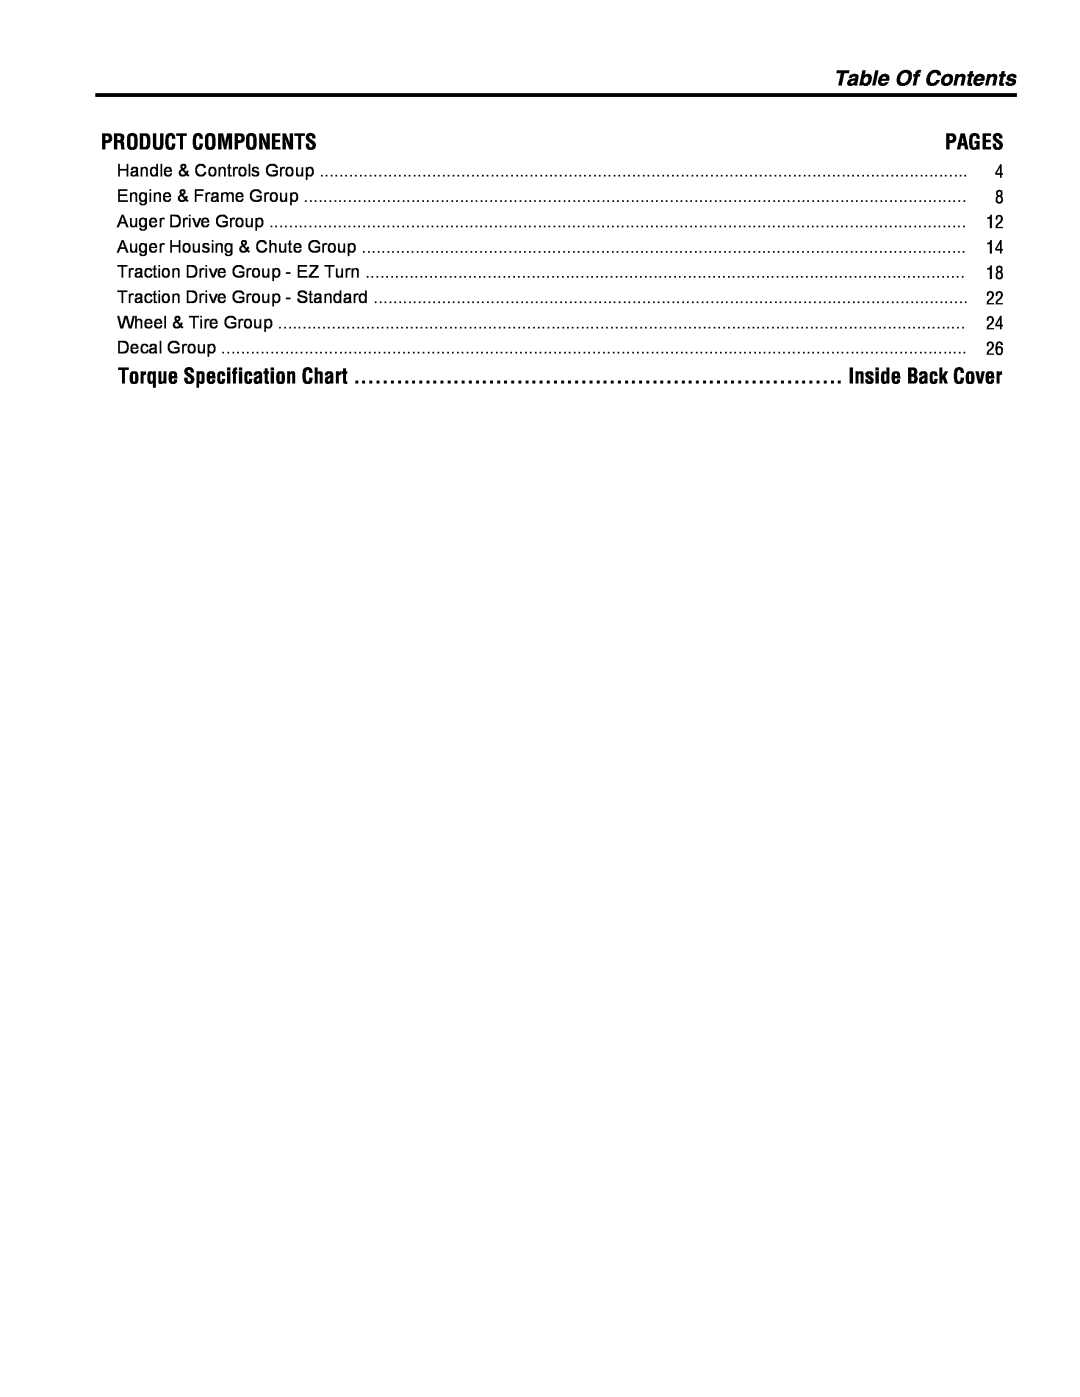 Simplicity 1696327, 1696330 Table Of Contents, Product Components, Pages, Torque Specification Chart, Inside Back Cover 